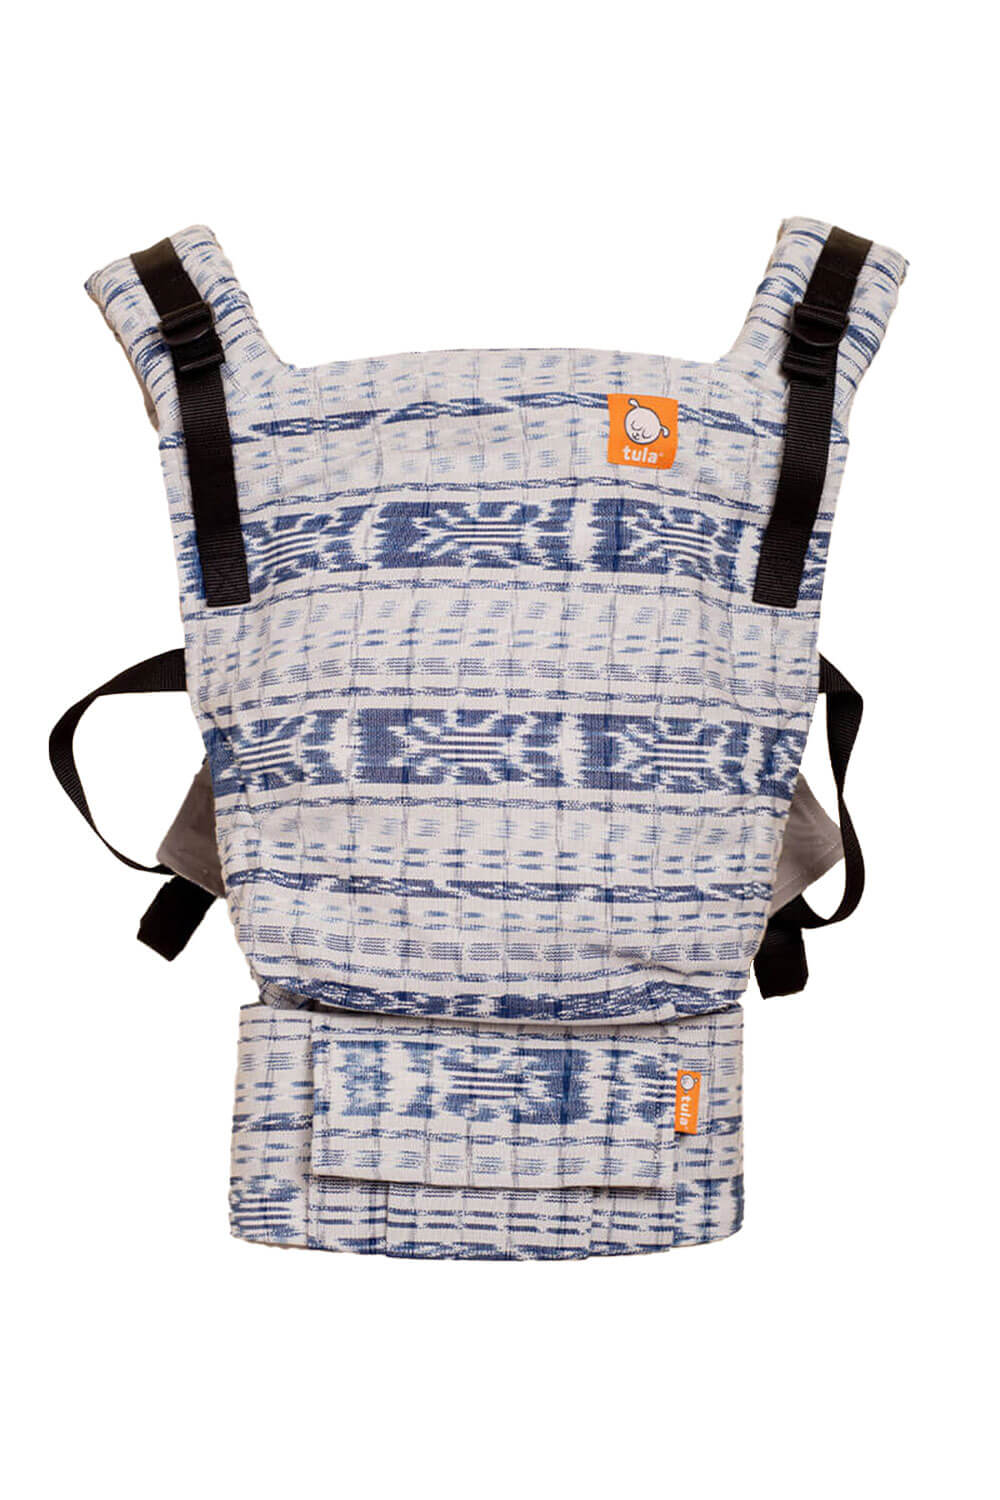 Silver Sky Ikat - Signature Woven Free-to-Grow Baby Carrier